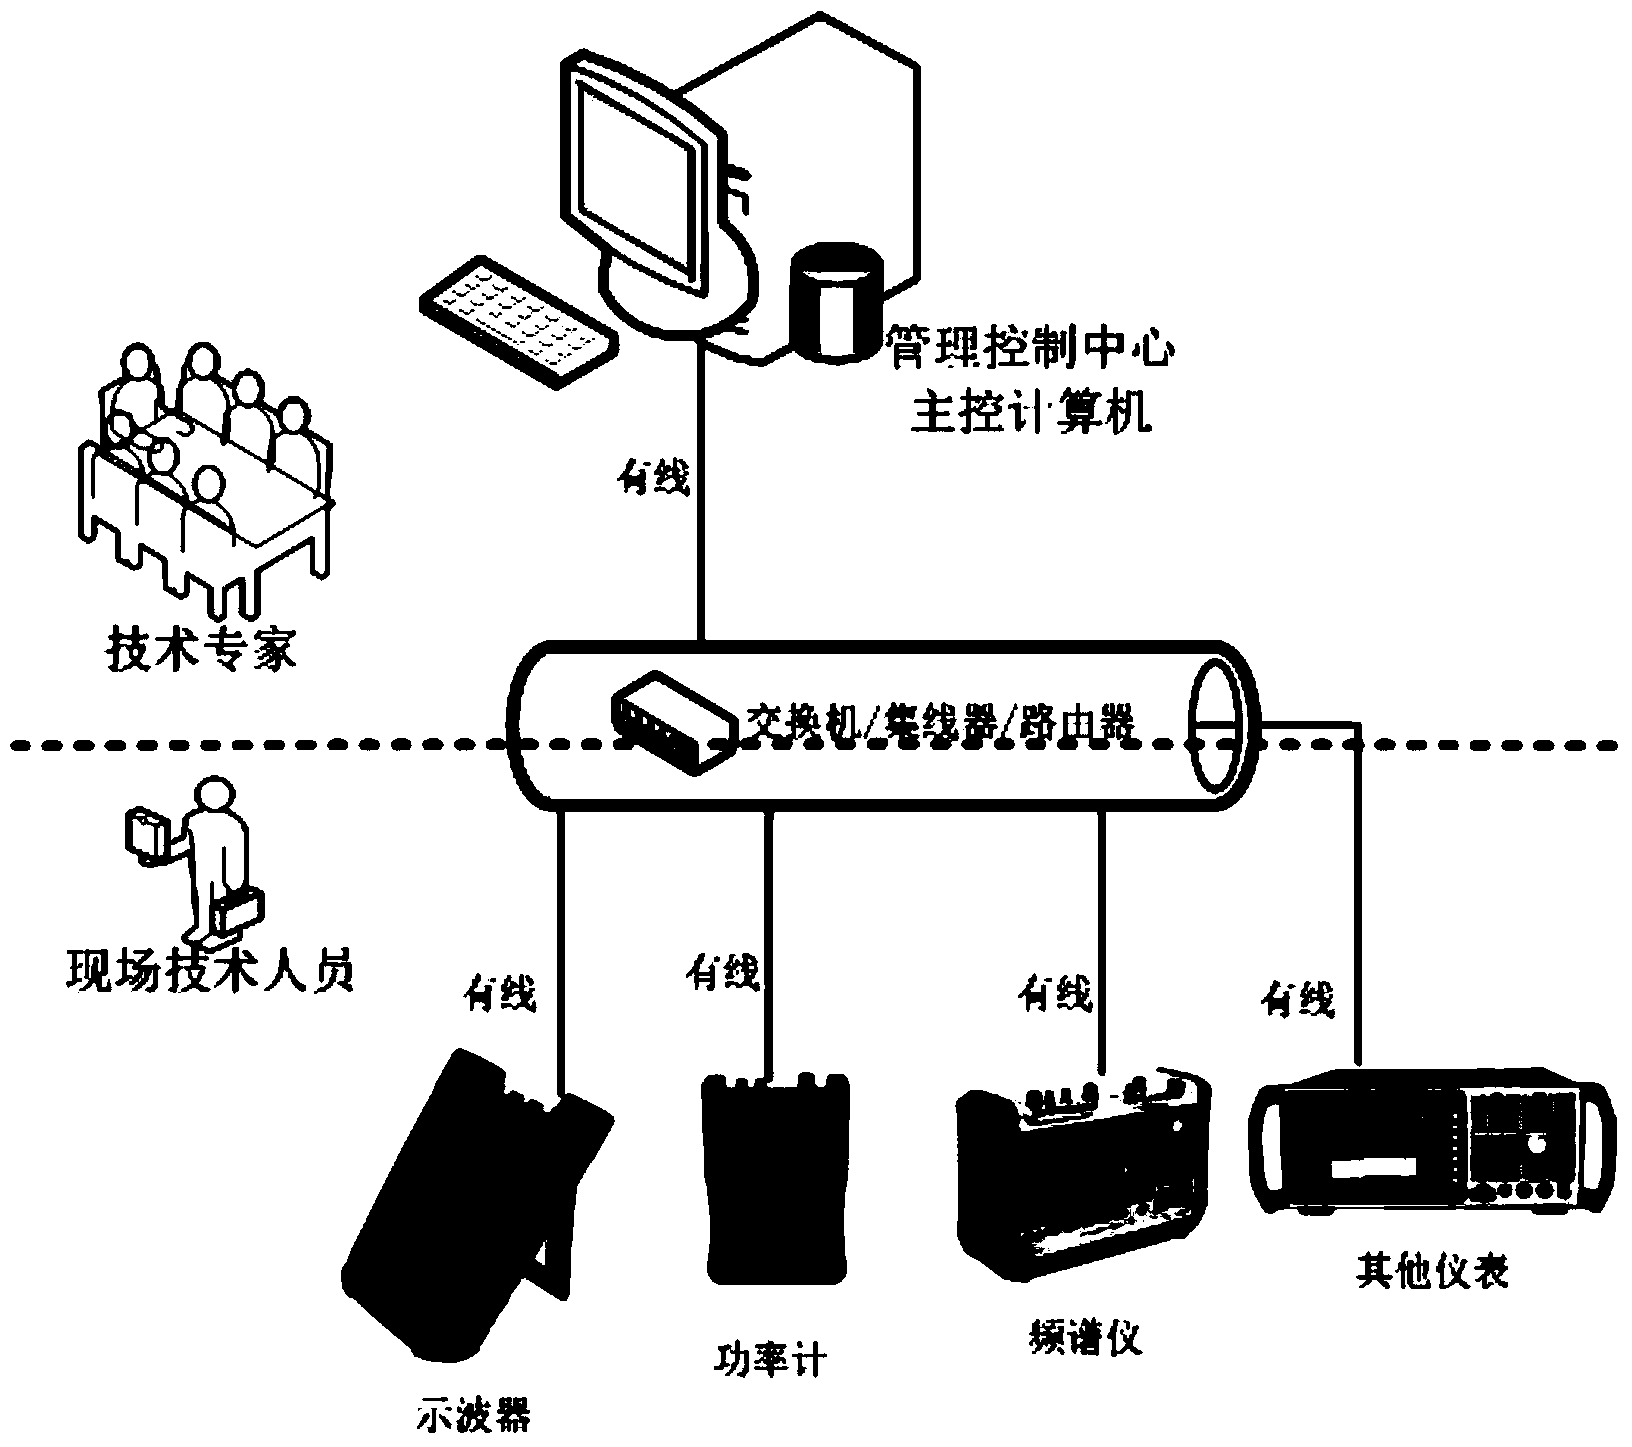 Processing method for unloading and receiving test result information